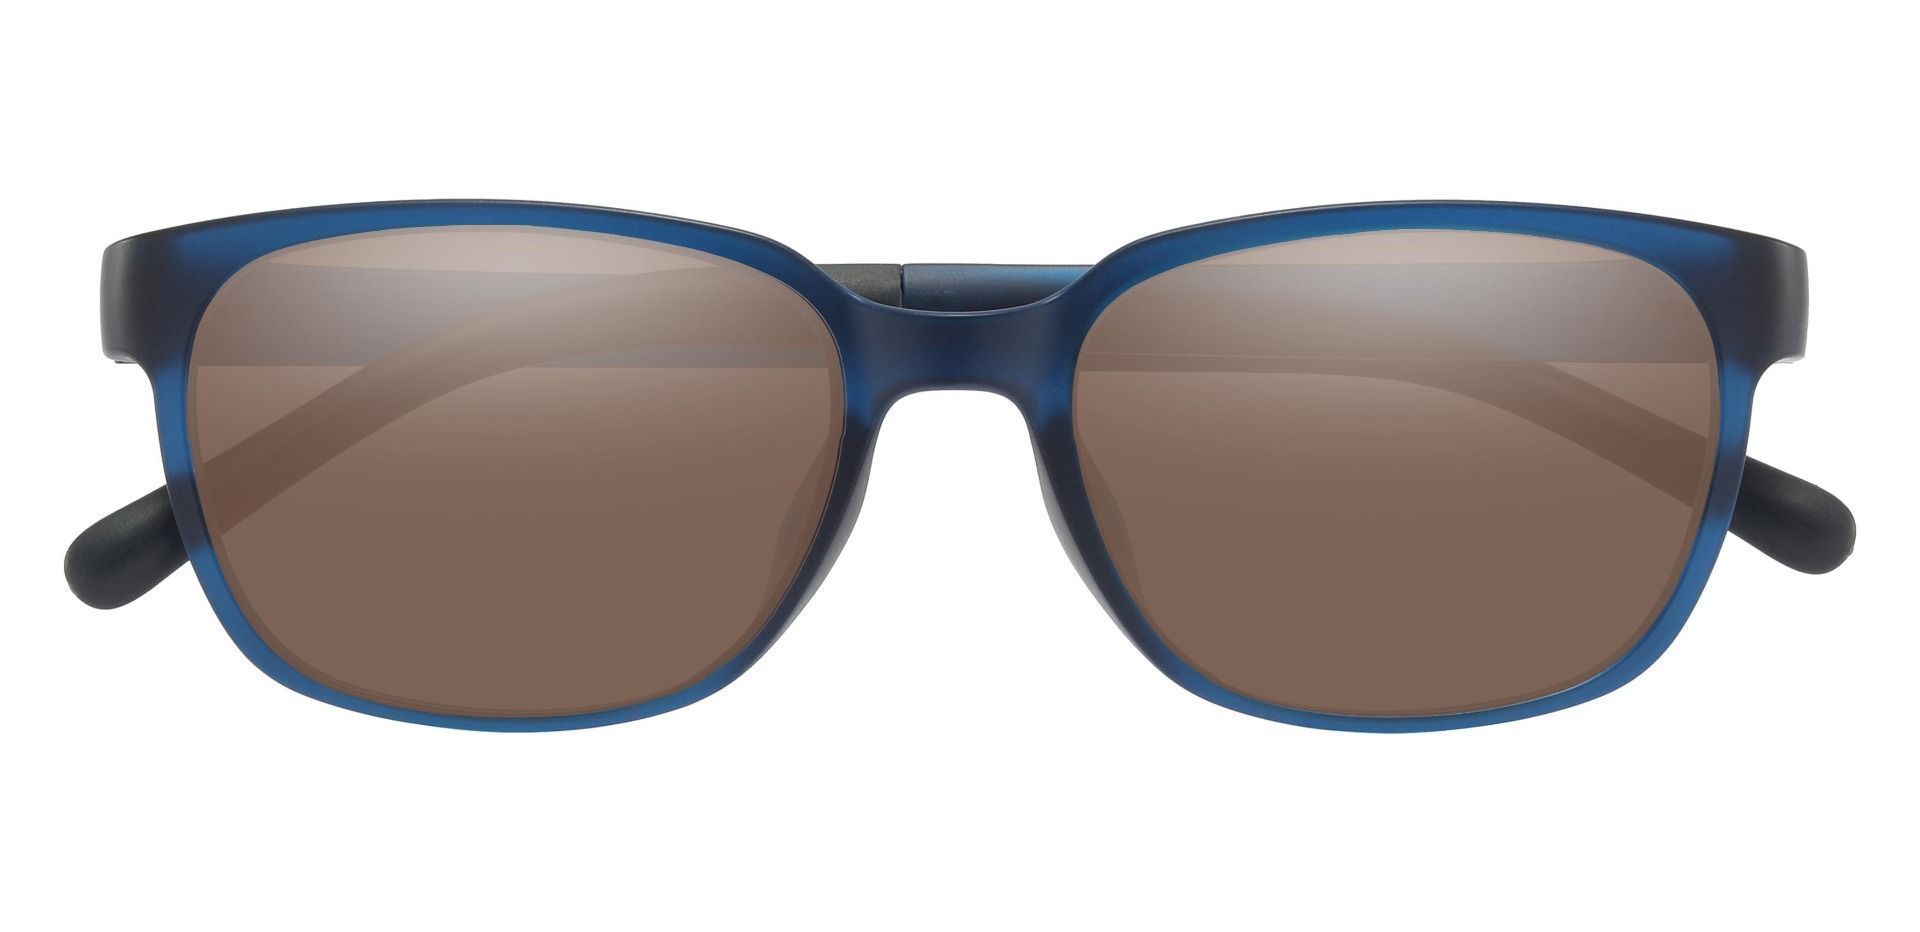 Orchard Rectangle Prescription Sunglasses - Blue Frame With Brown Lenses